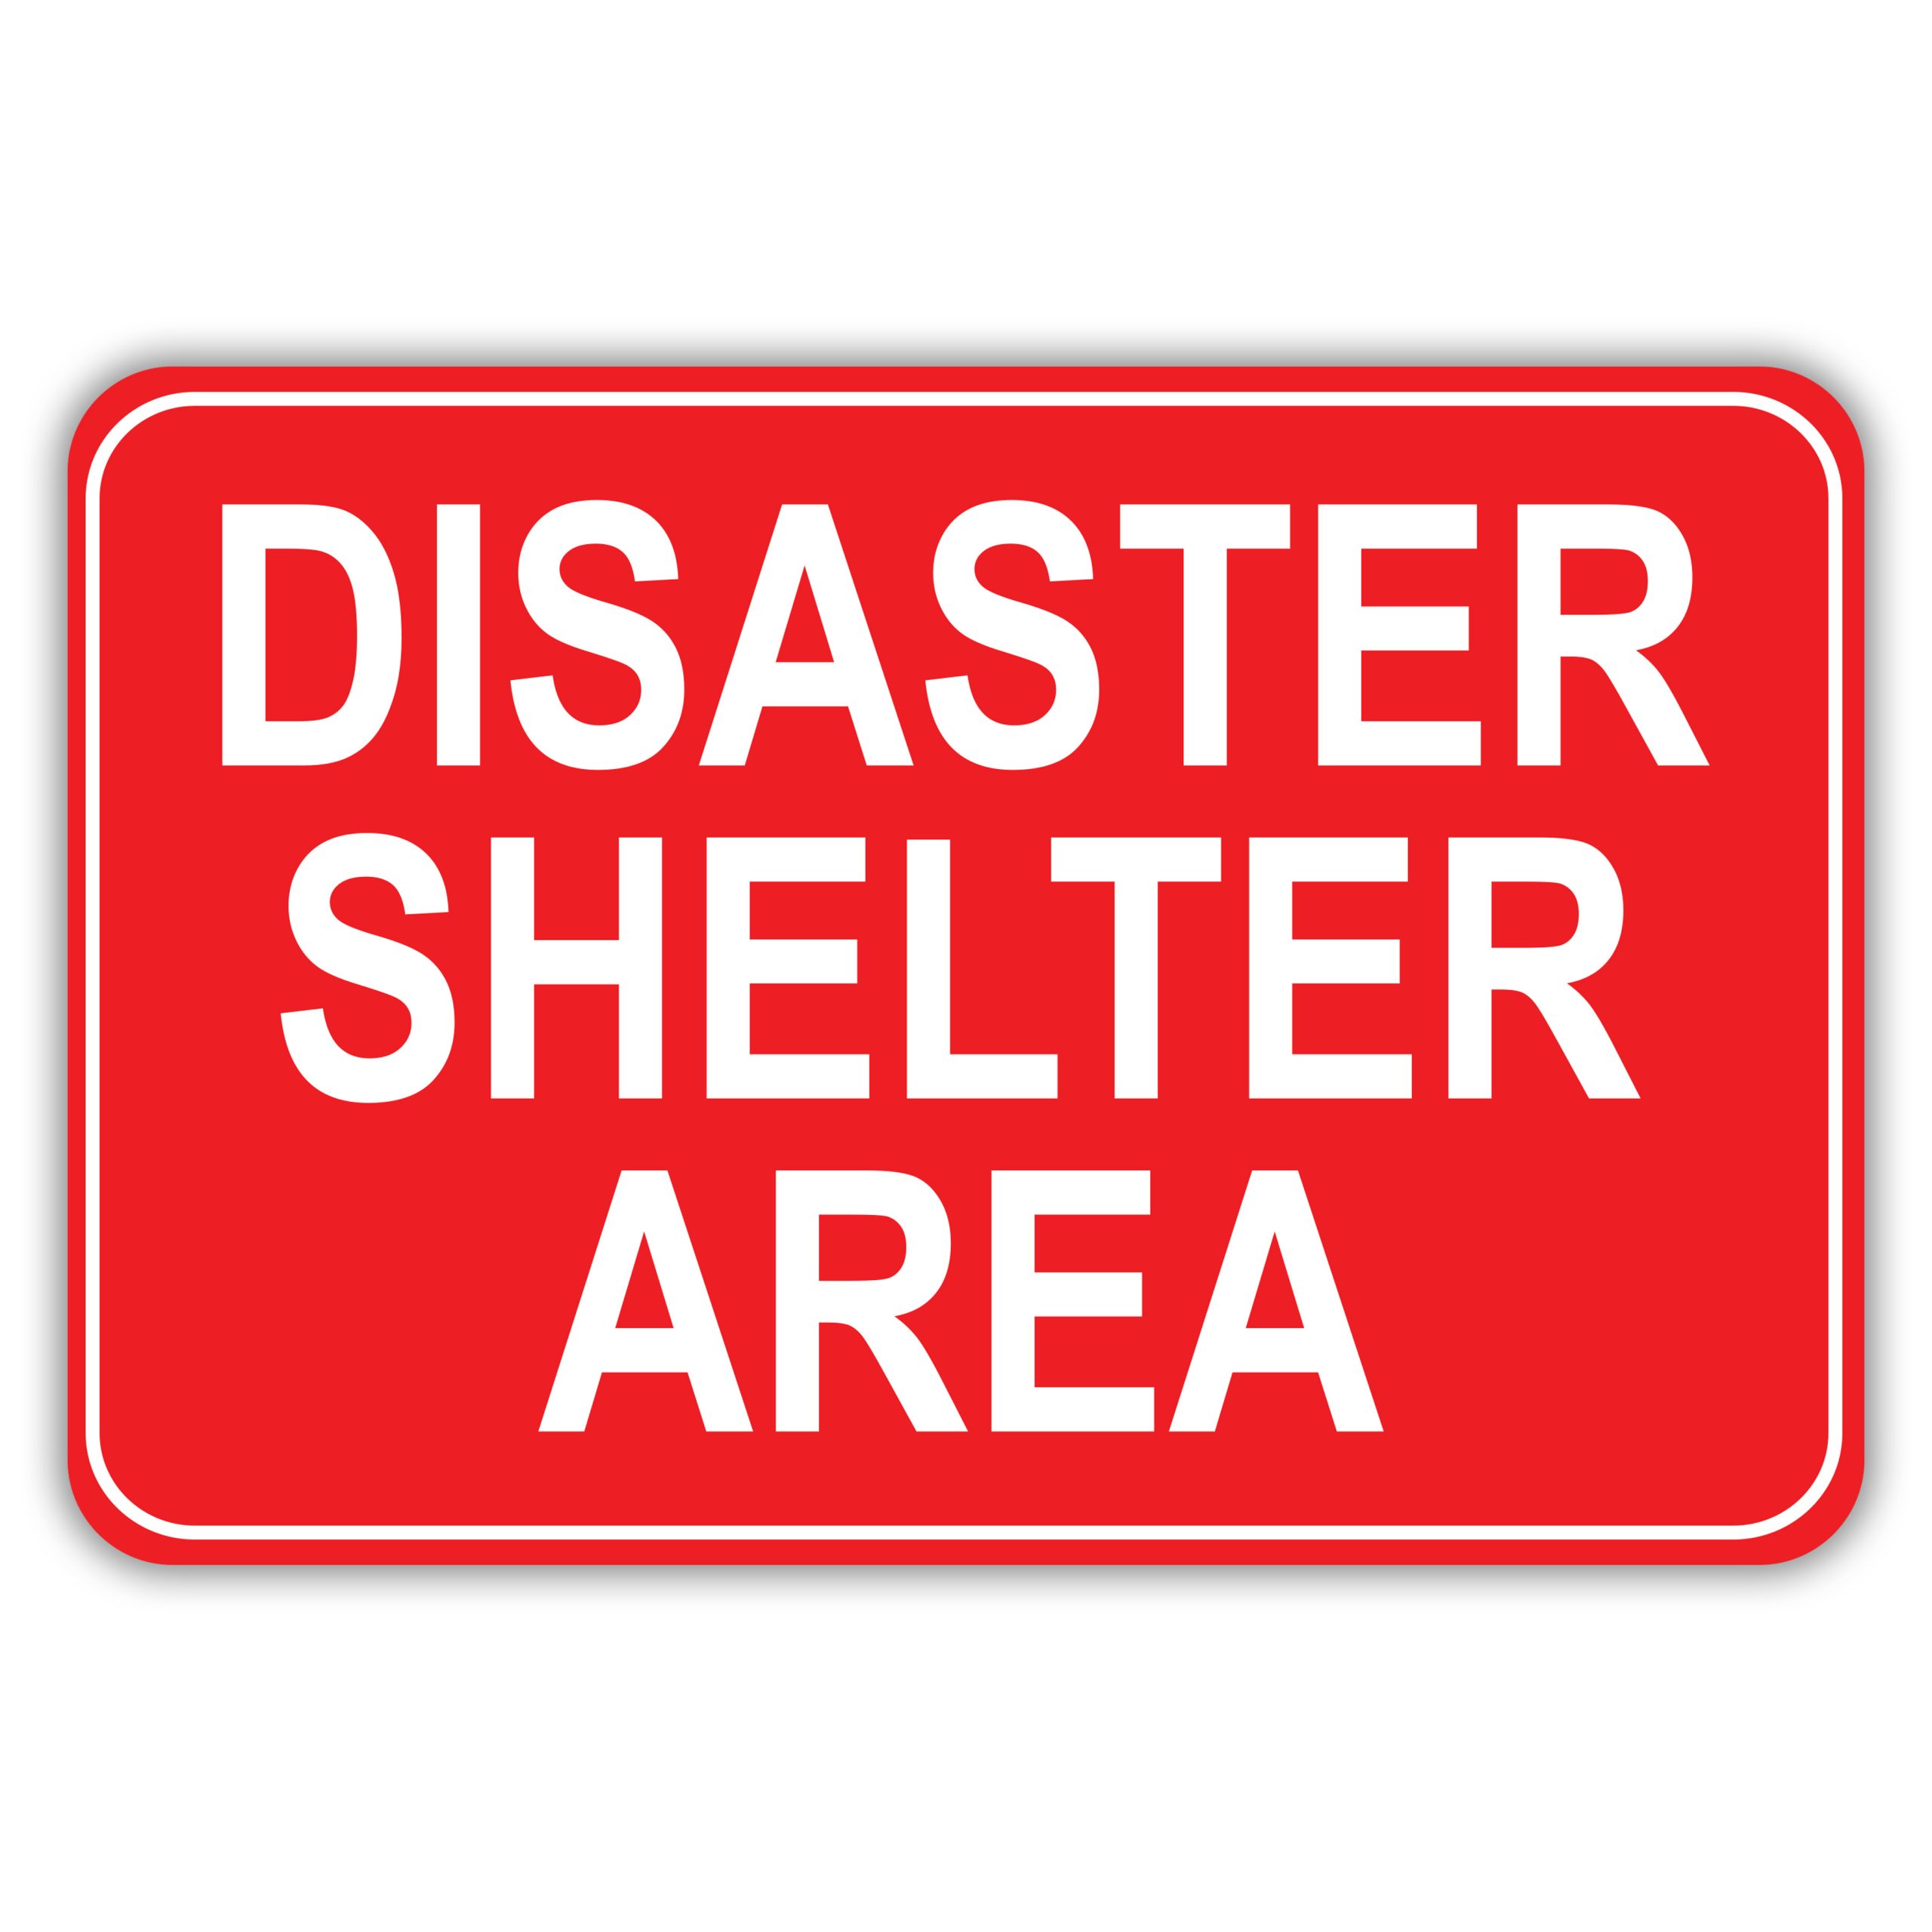 DISASTER SHELTER AREA - American Sign Company